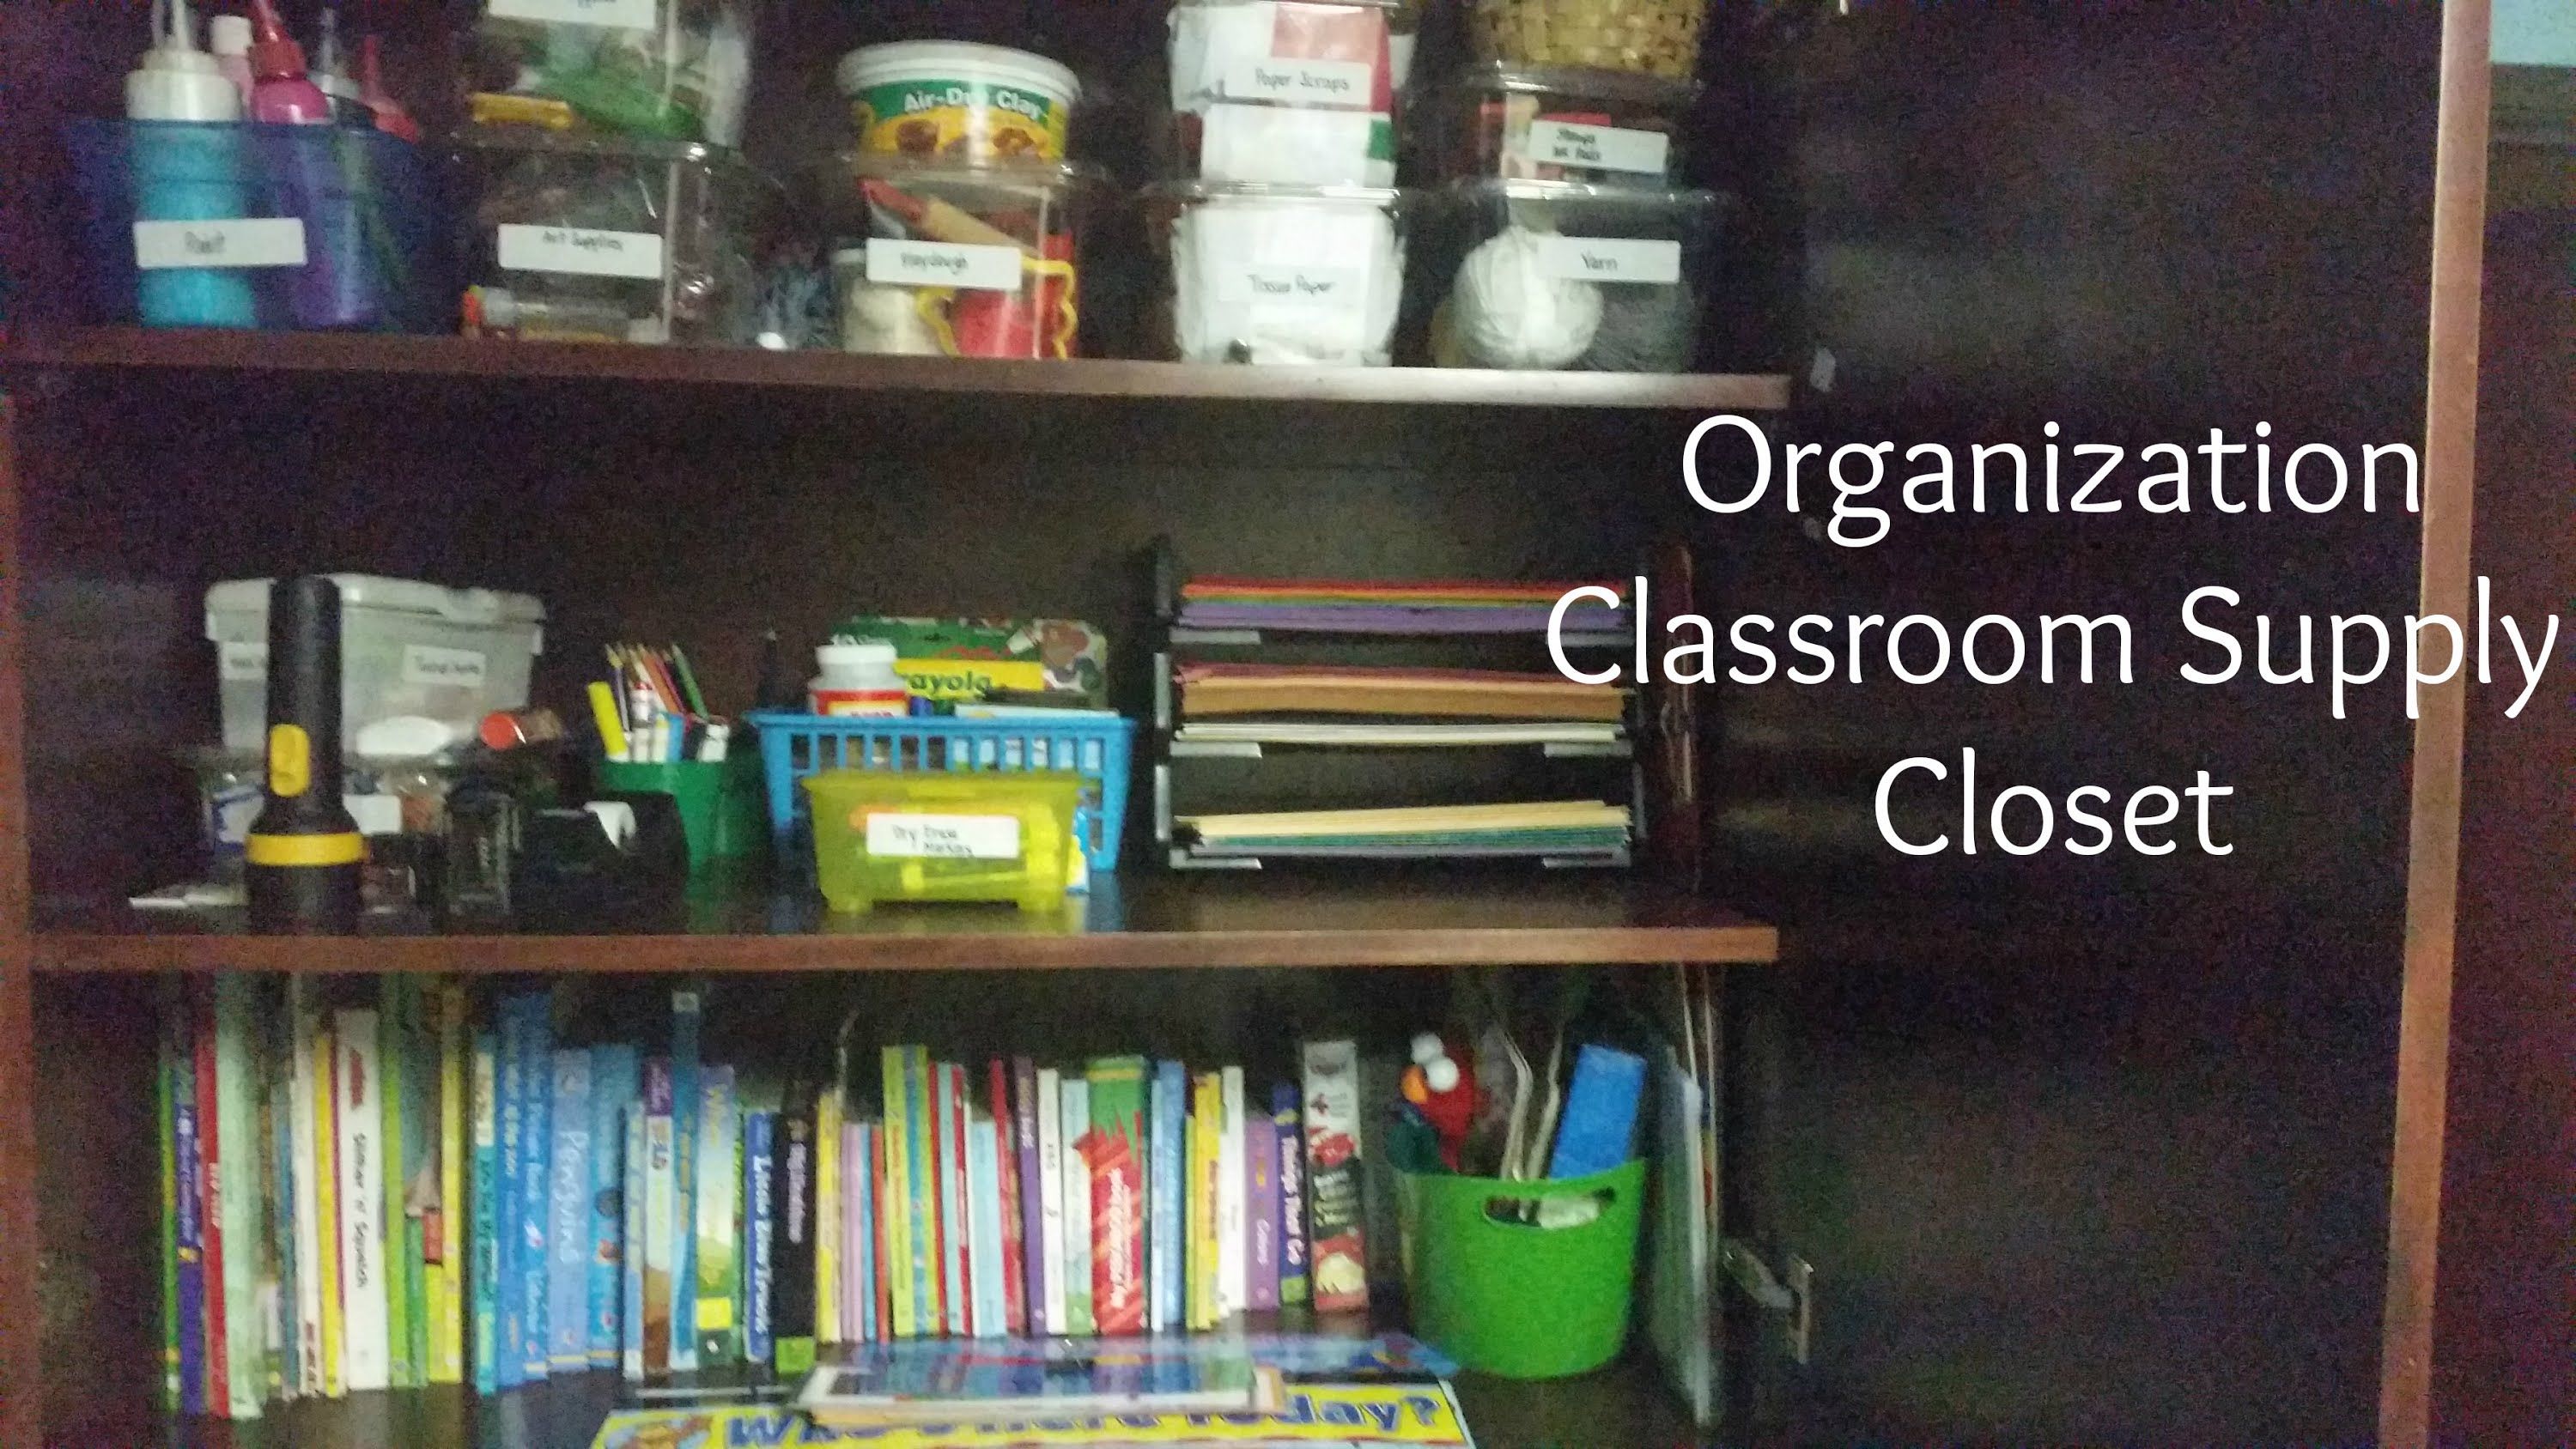 Decorate school supplies ideas -   Great ideas for organizing classroom supplies